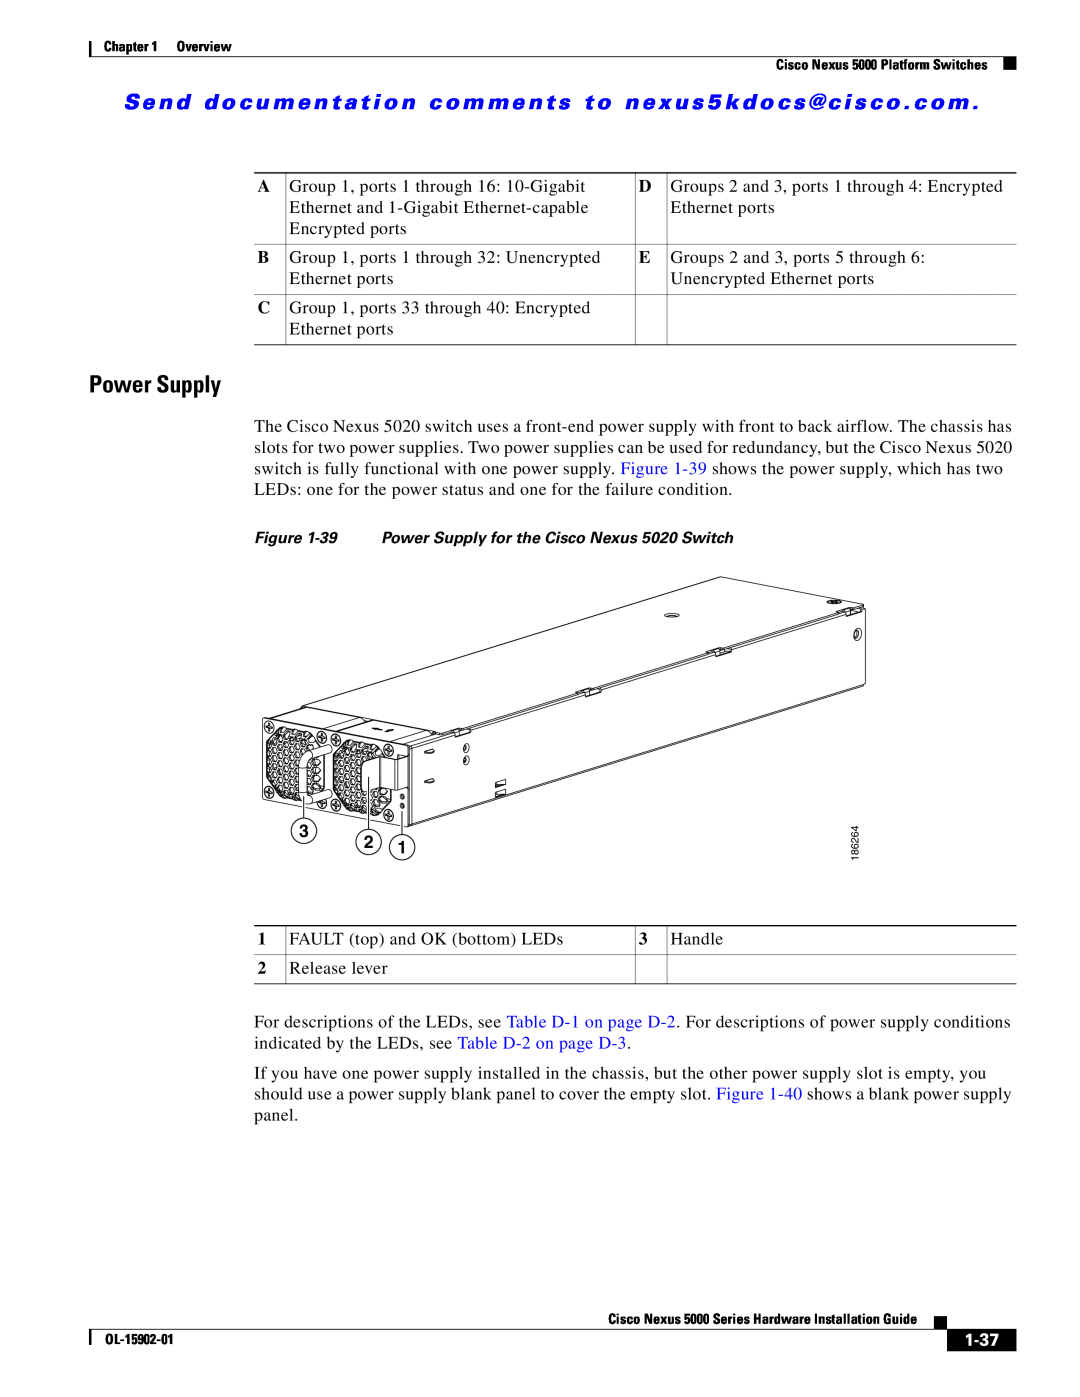 Cisco Systems 5000 manual 1-37, 39 Power Supply for the Cisco Nexus 5020 Switch 